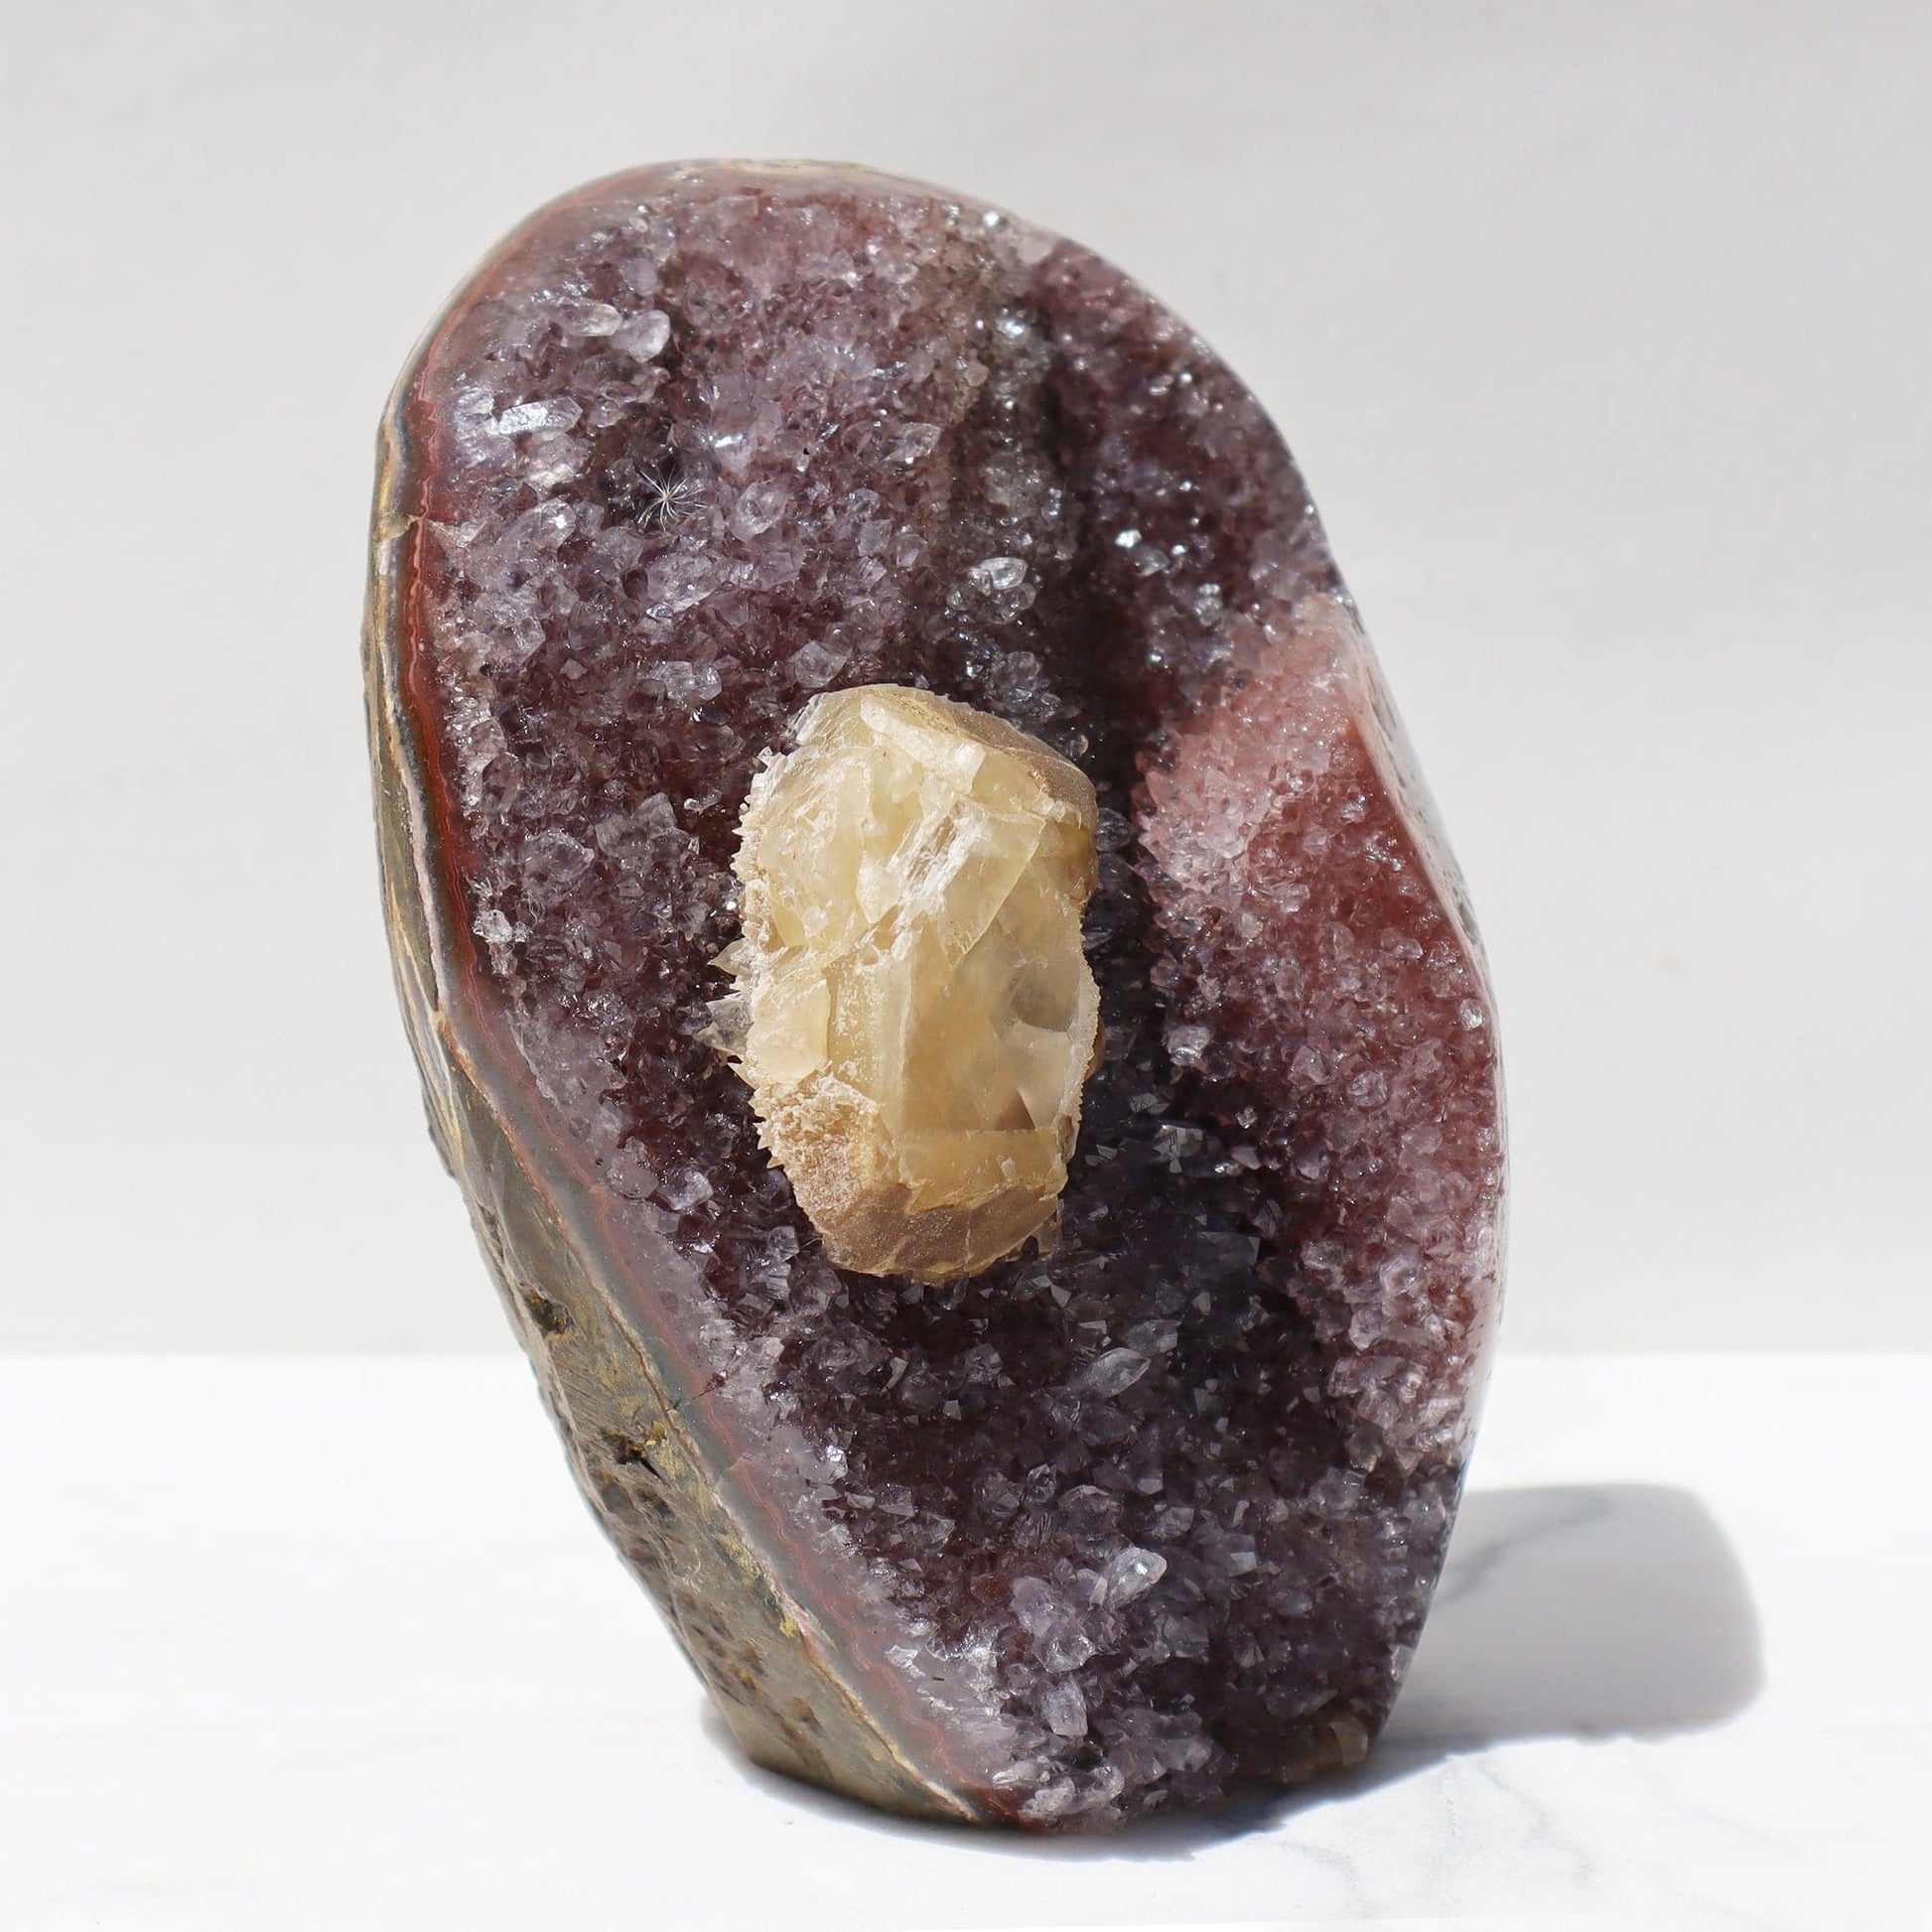 Virile Unconventional Earthy - Large Calcite - Deepest Earth